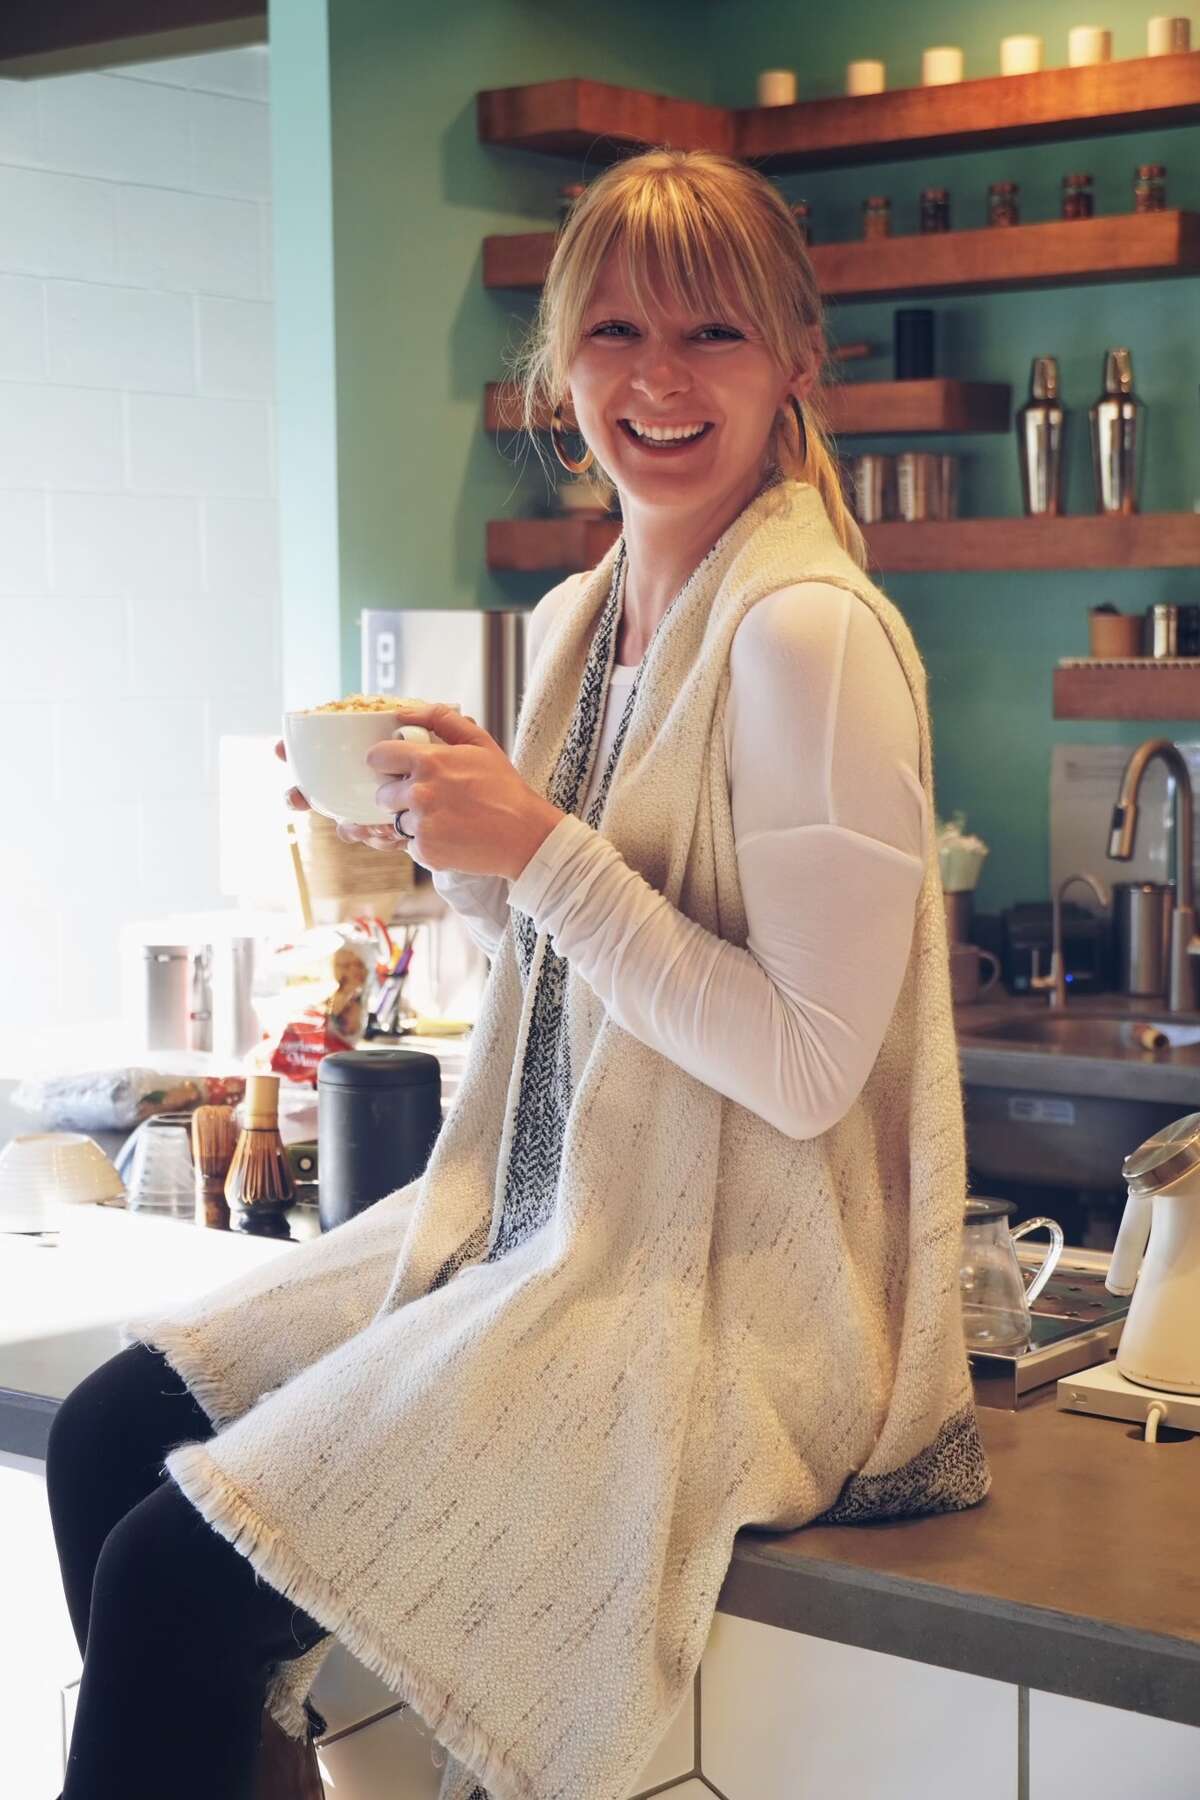 Marissa Bourcier of Linwood frequented Grove Tea Lounge as a customer during its first year in business, before joining the staff in September of 2020. (Photo provided/Marissa Bourcier)